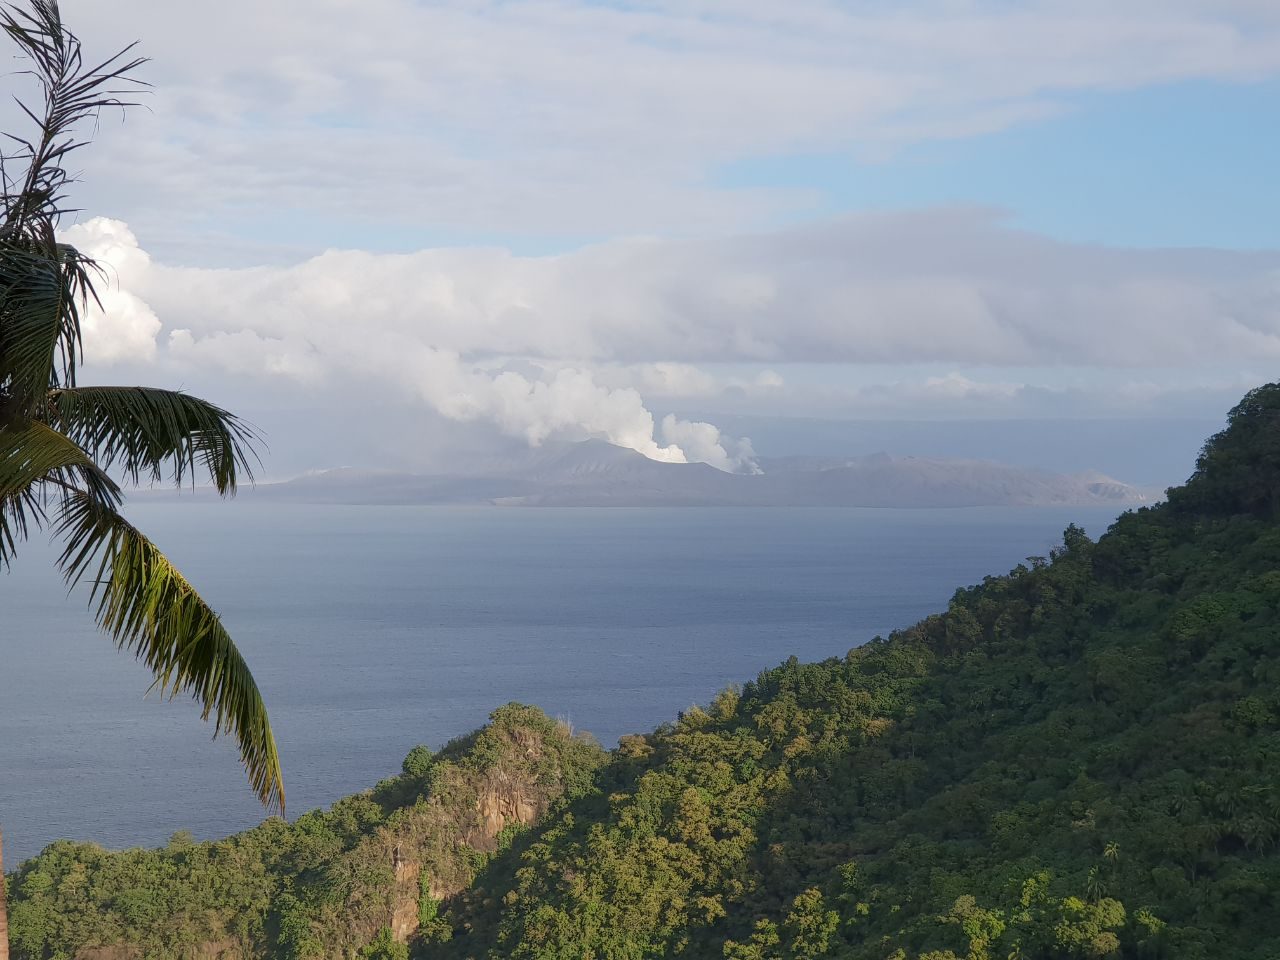 Taal Volcano threat persists, at least 466 volcanic earthquakes recorded